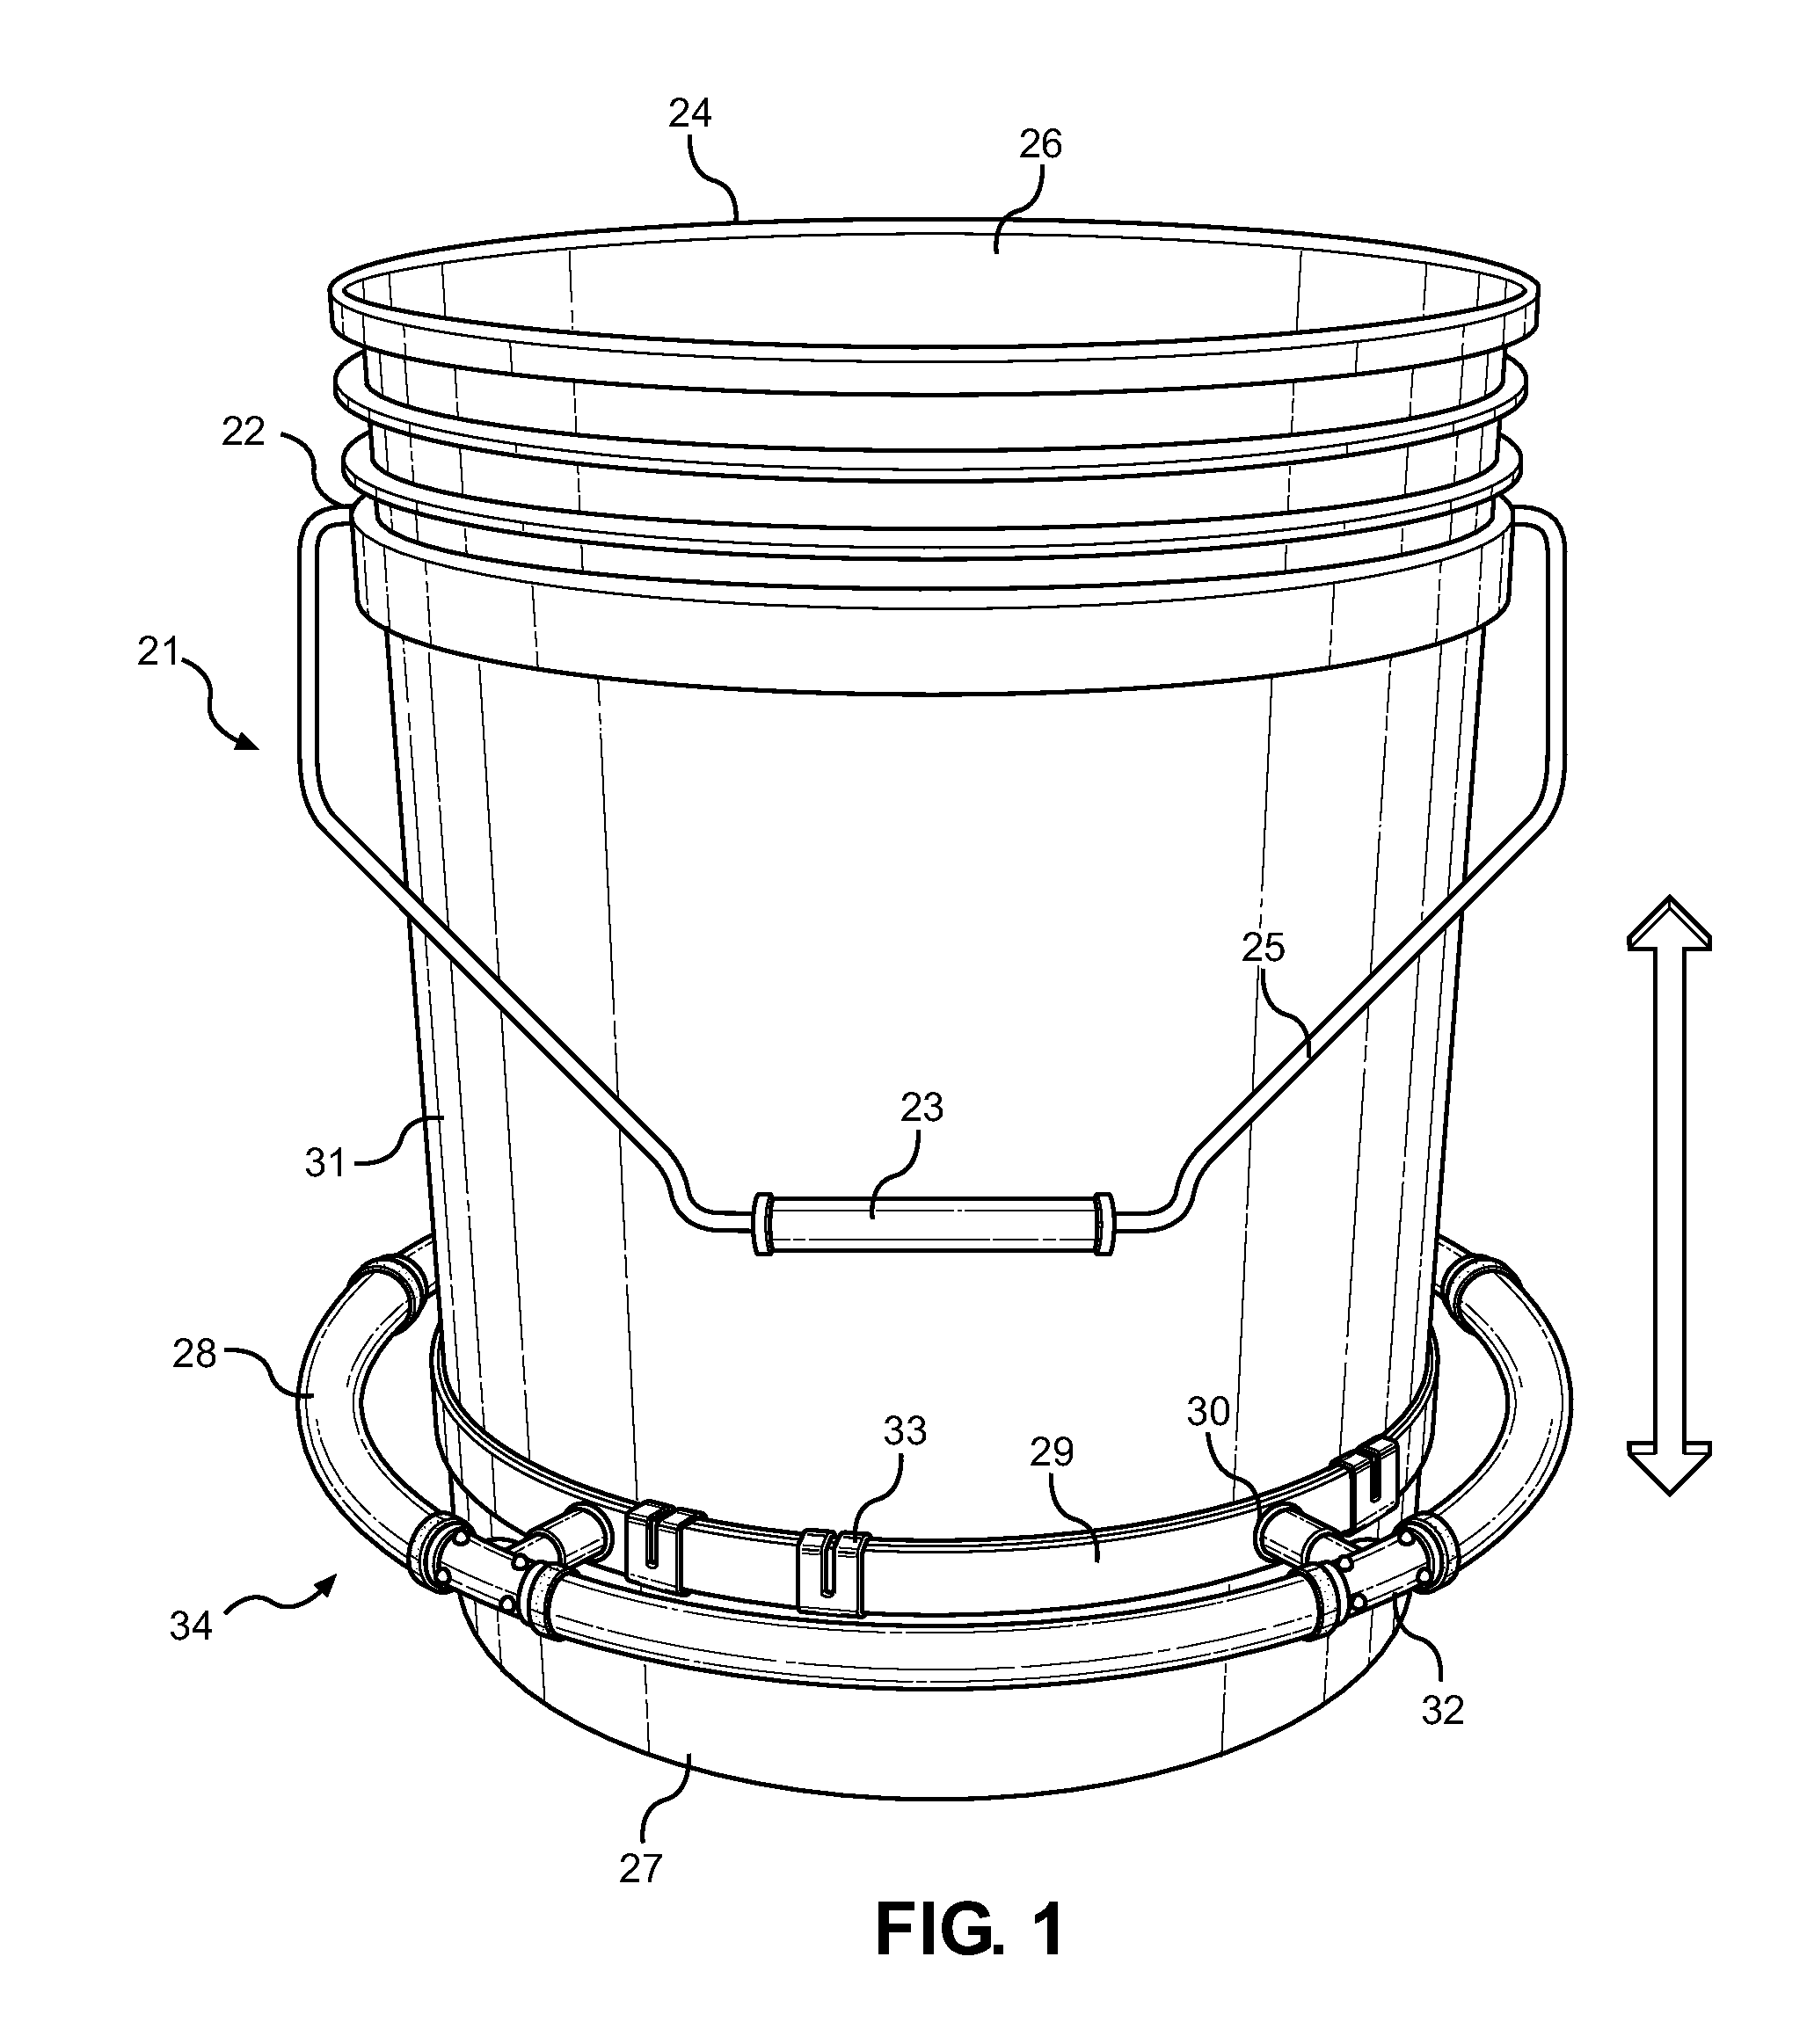 Bucket with Adjustable Lifting Assembly